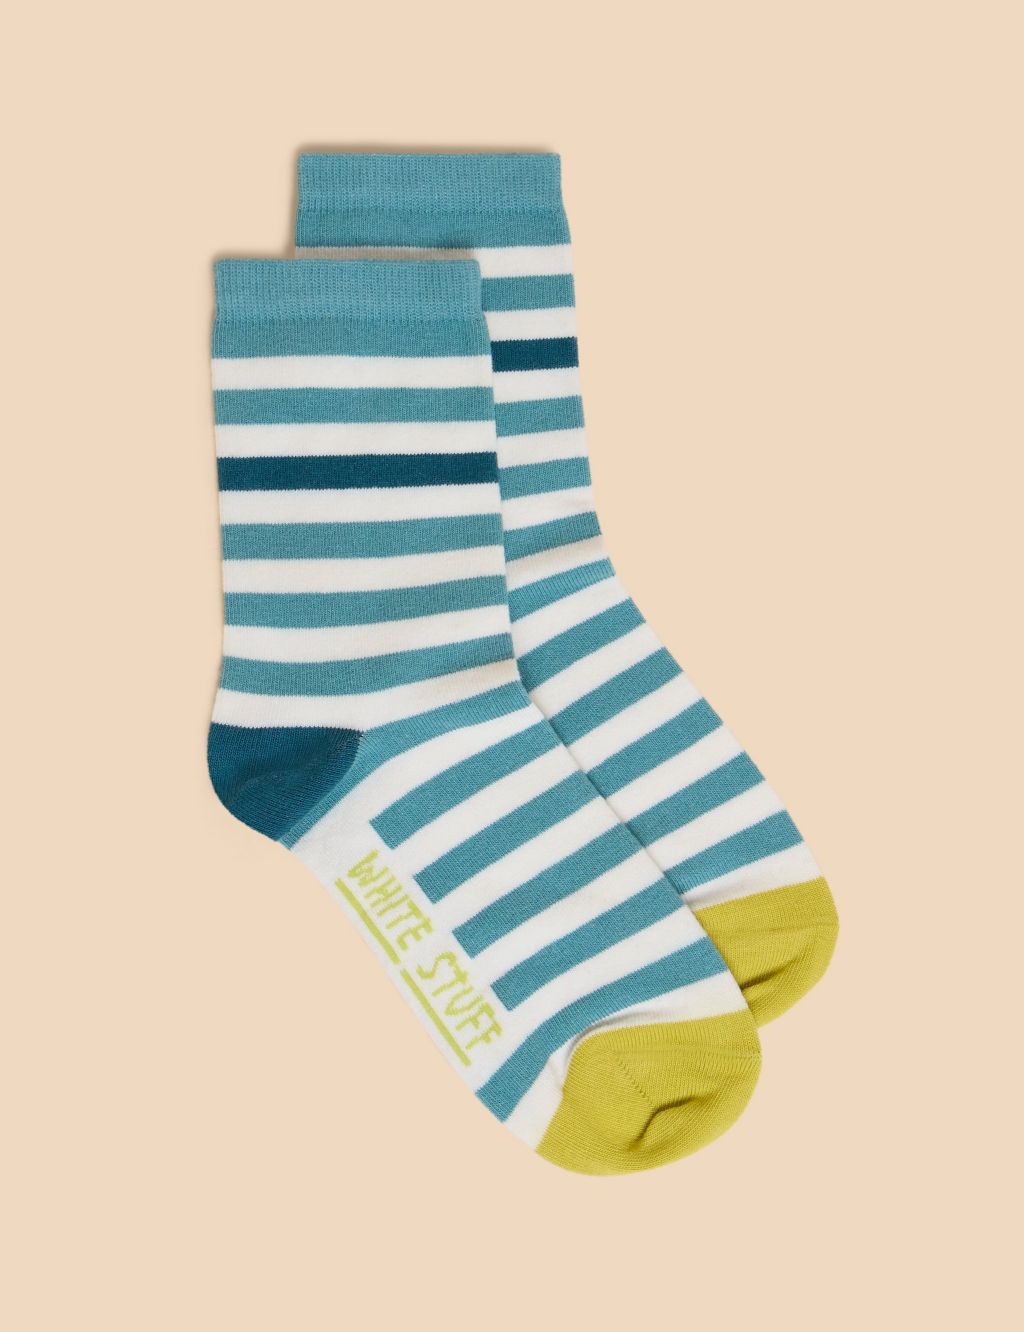 Cotton Rich Striped Ankle High Socks